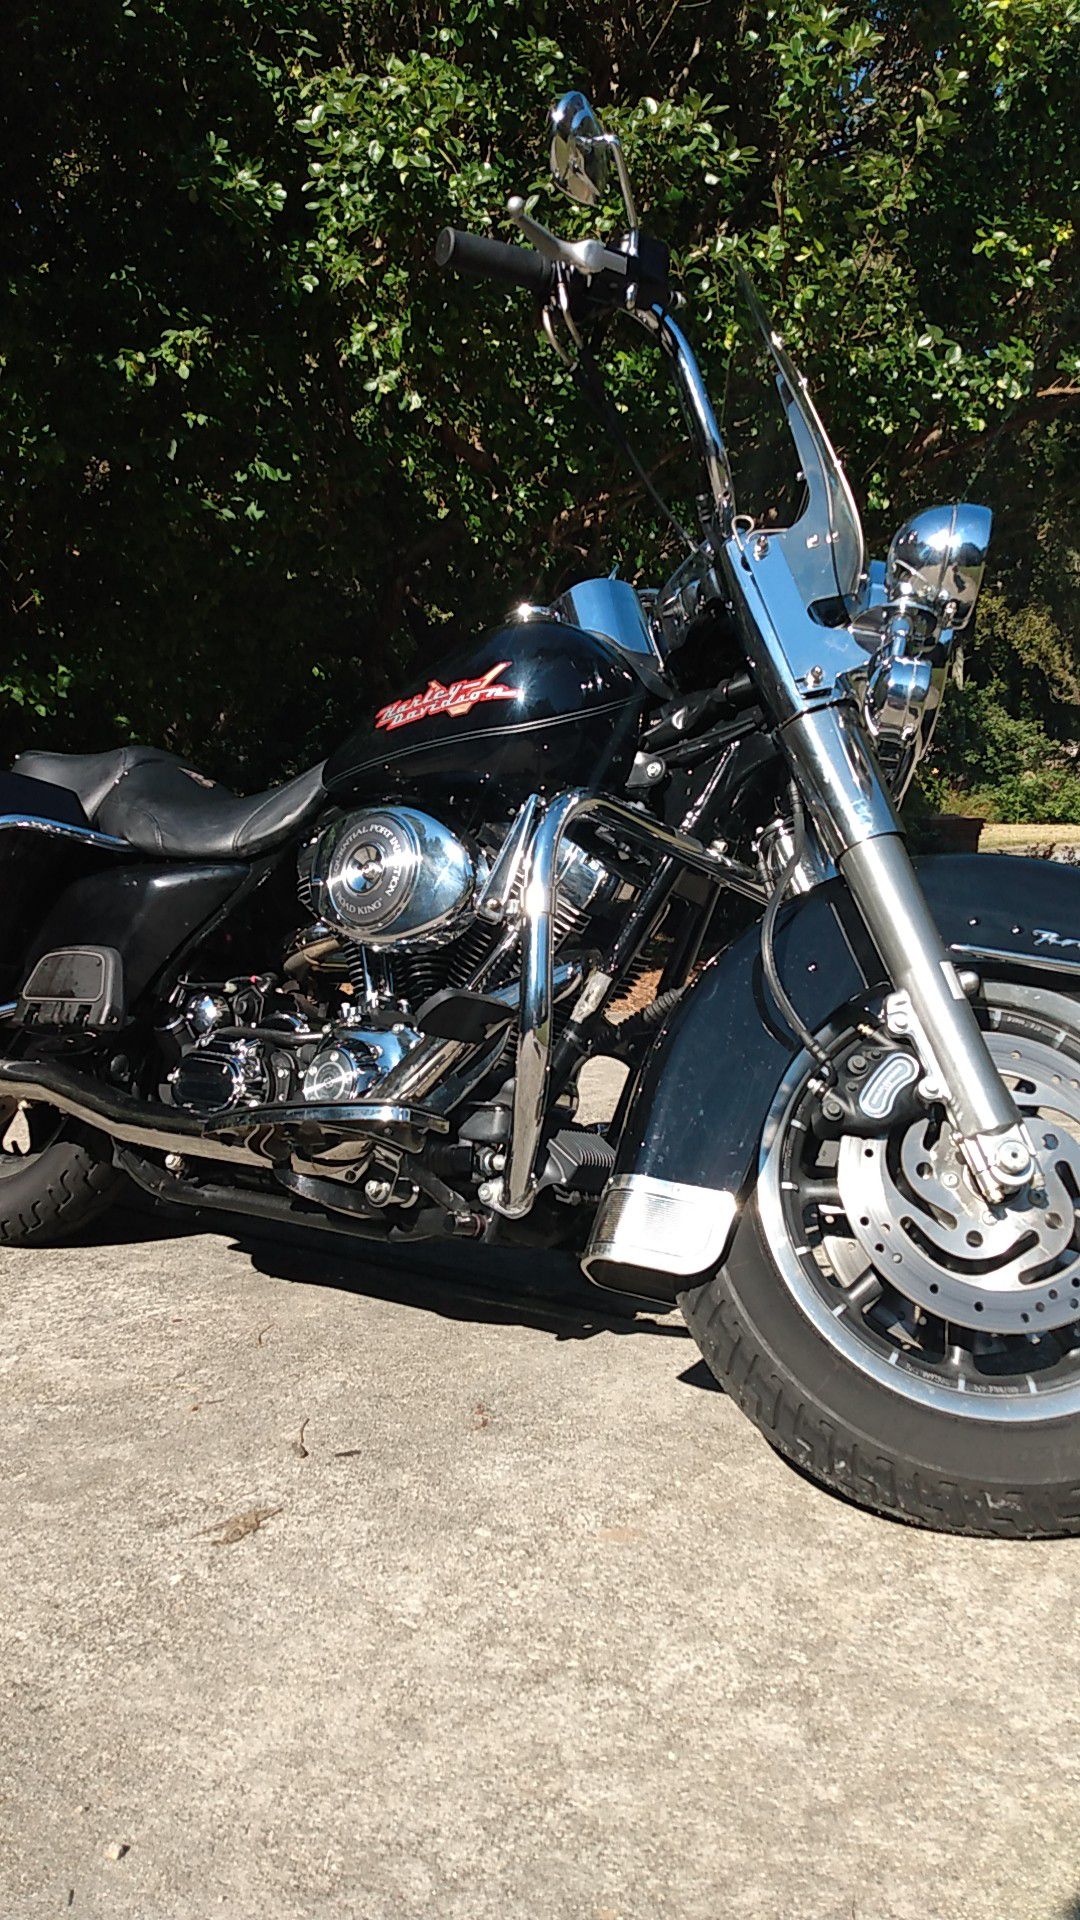 2004 Harley Davidson road King flhri edition. With only 13, 607 MI it's been garage kept, older bike that looks brand new with low miles!